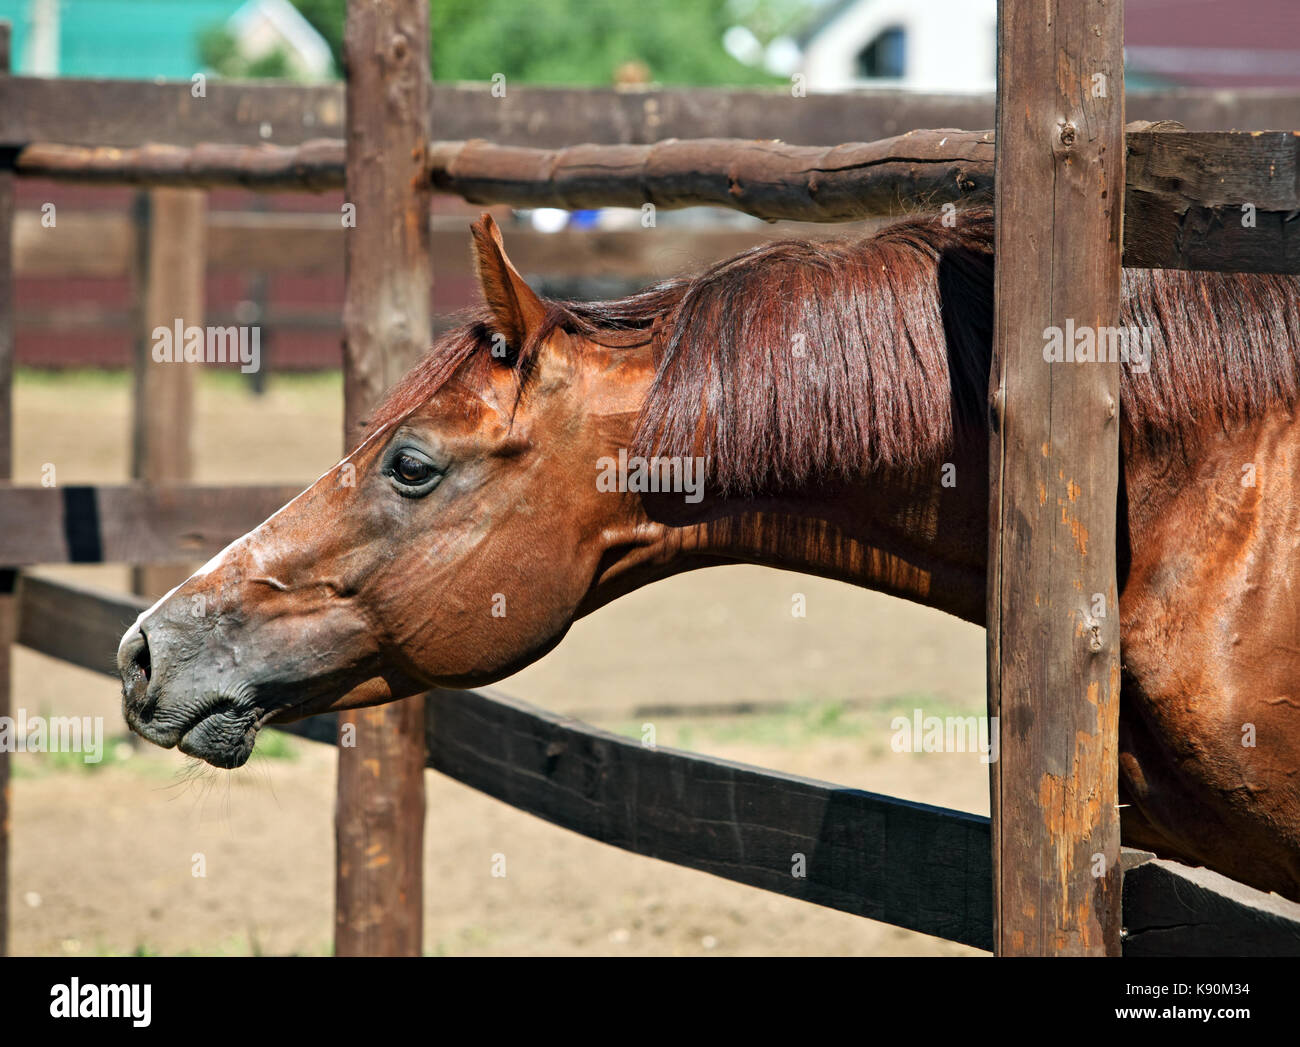 Ranch Horse Profile by Fence Stock Photo